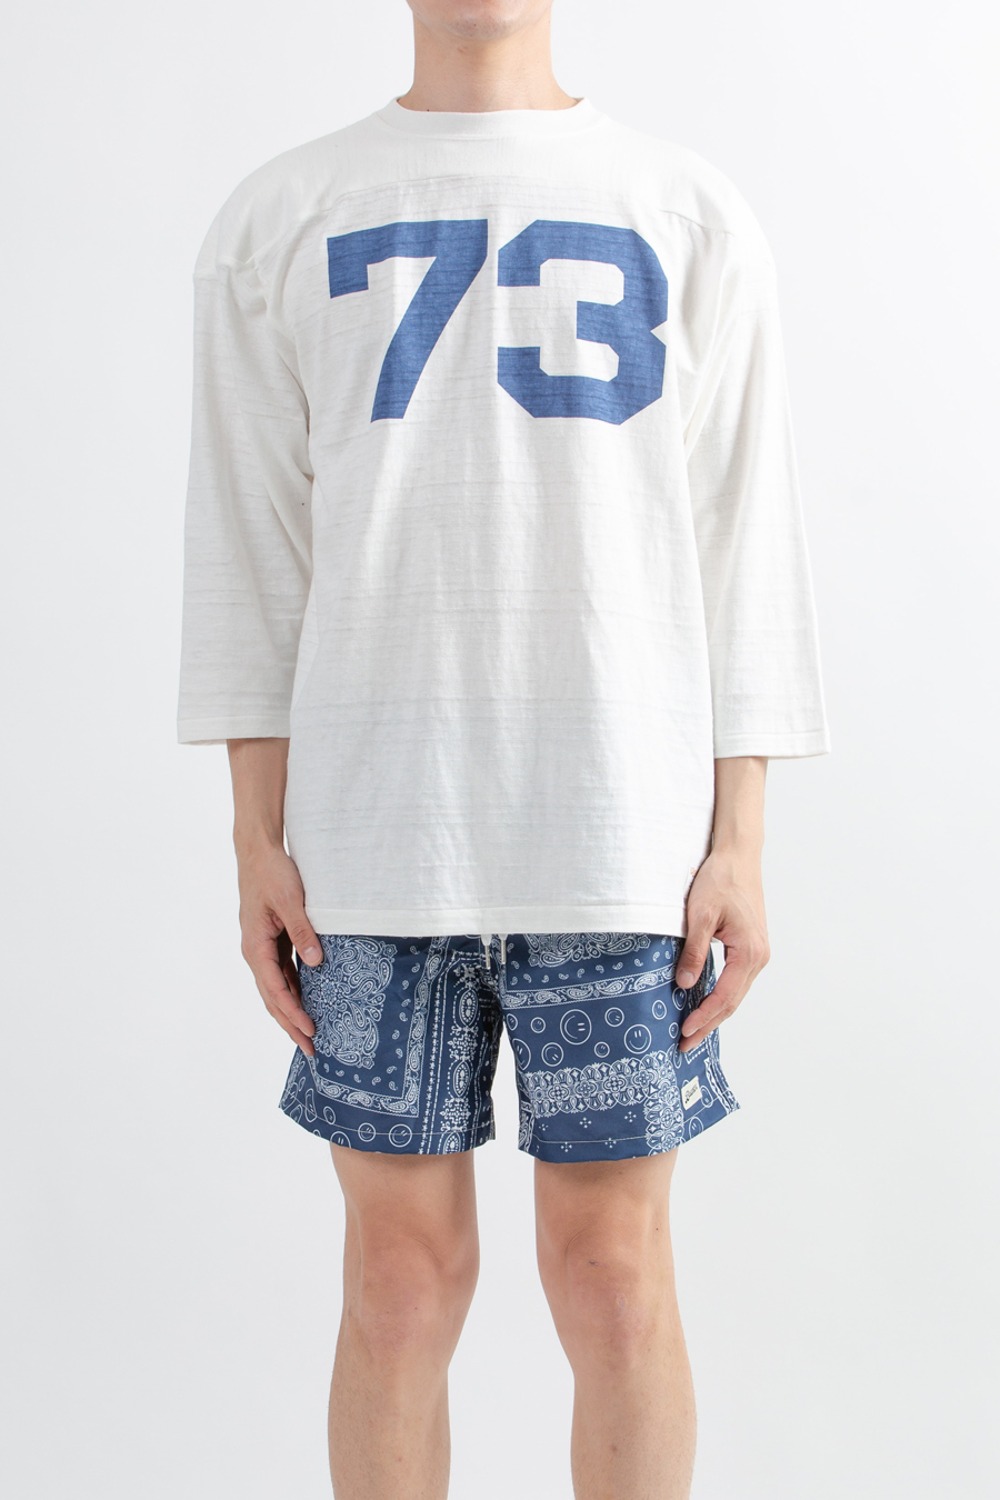 LOT 4063 3/4 SLEEVE FOOTBALL T NO.73 OFFWHITE